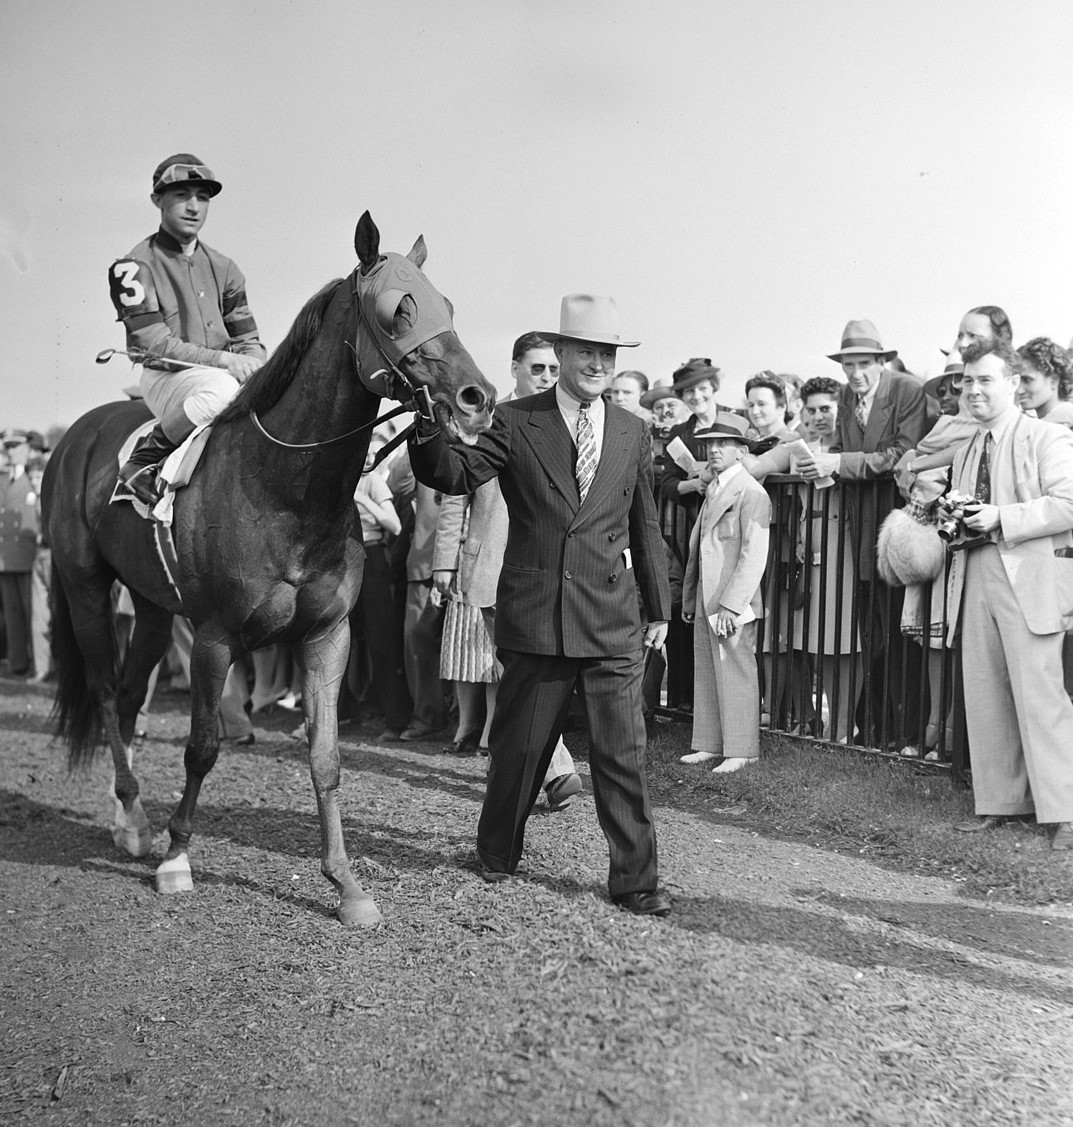 Eddie Arcaro on Whirlaway with Horace A. Jimmy Jones after winning the Belmont Stakes